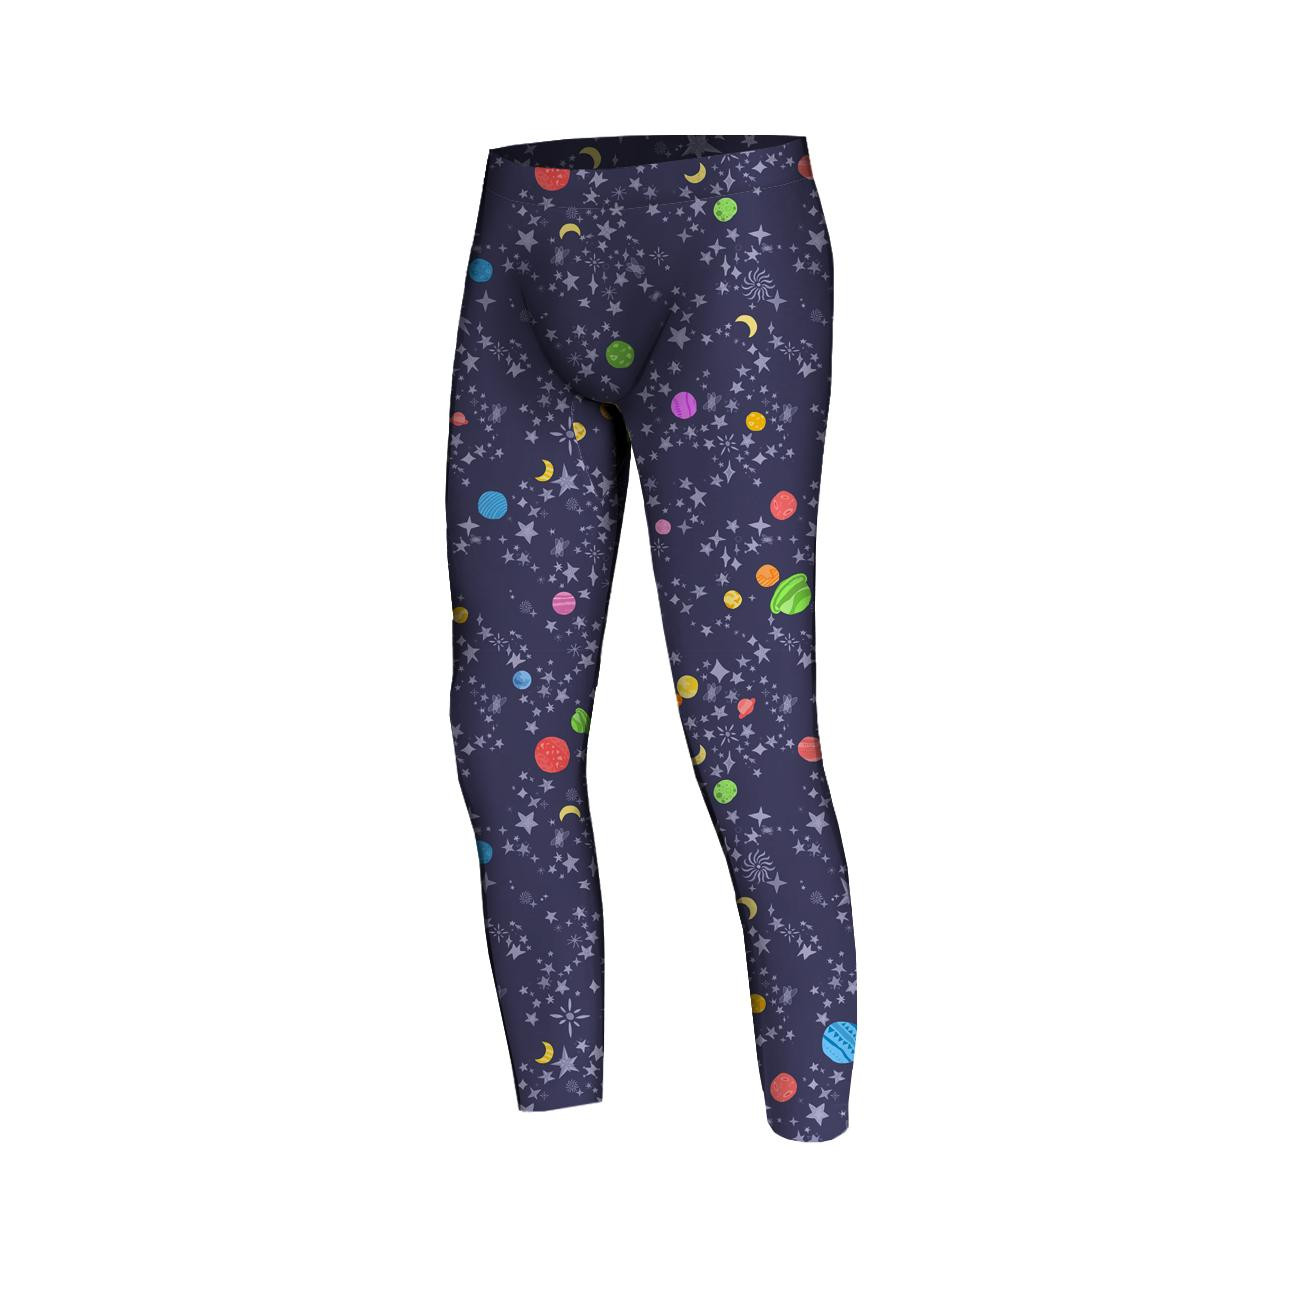 BOY'S THERMO LEGGINGS (HUGO) - PLANETS AND STARS ( GALAXY ) / dark blue -  sewing set - Sets and sewing patterns - Dresówka.pl